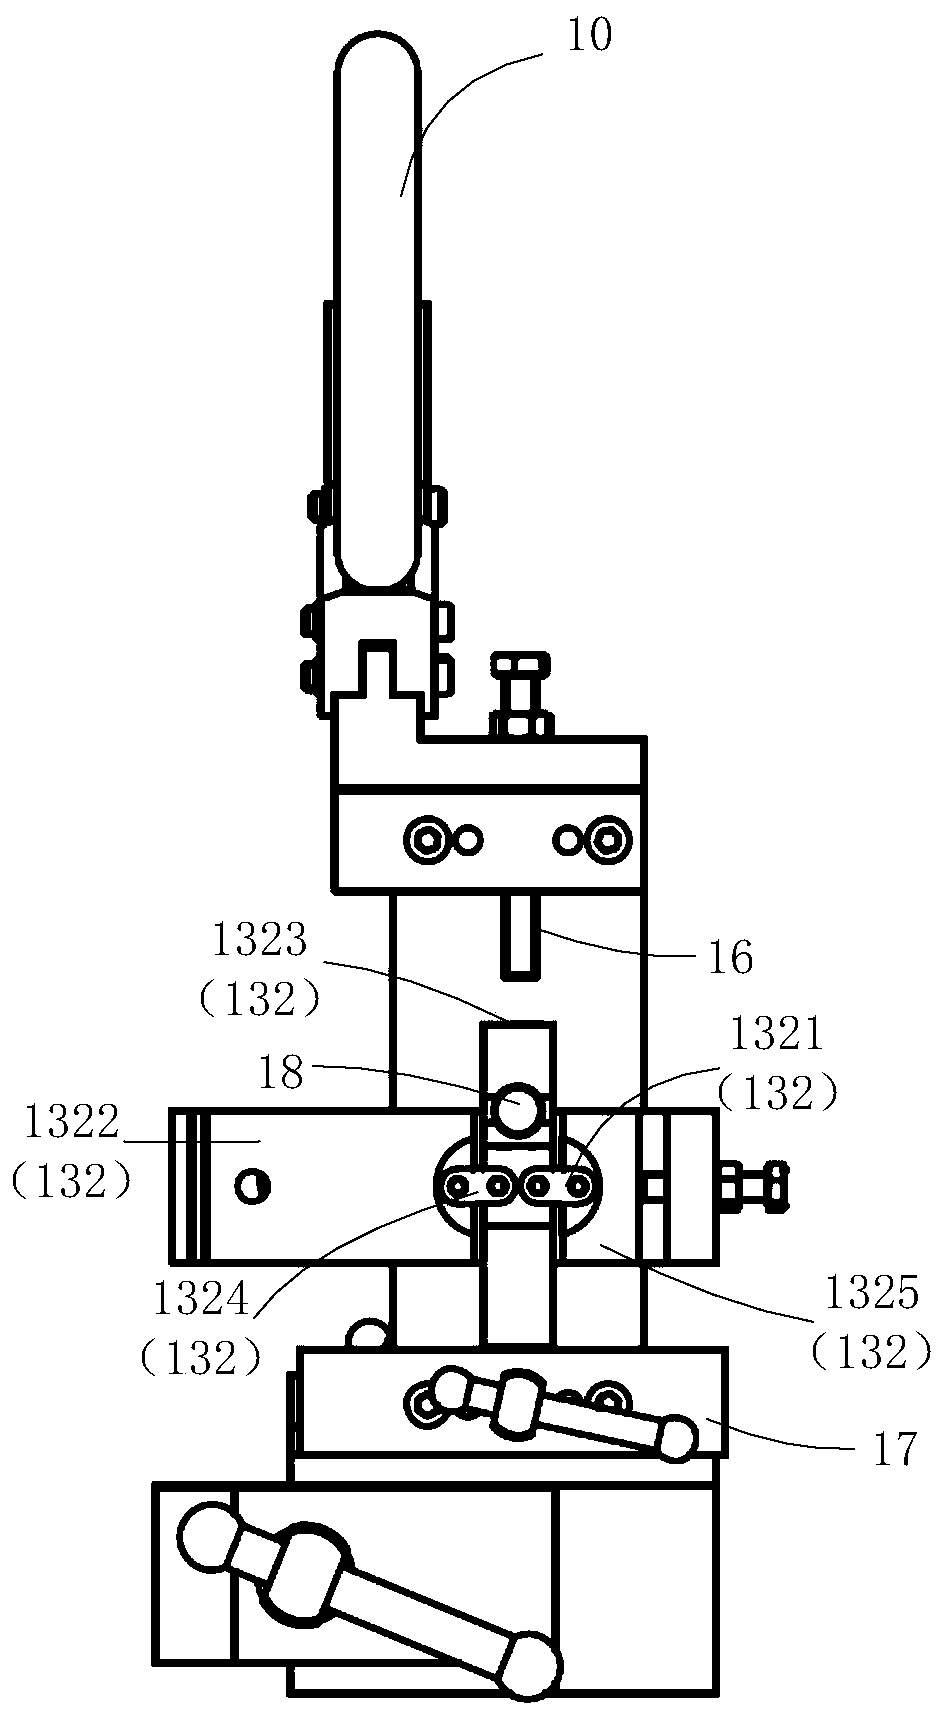 Reactor core thermocouple inserting and pulling device